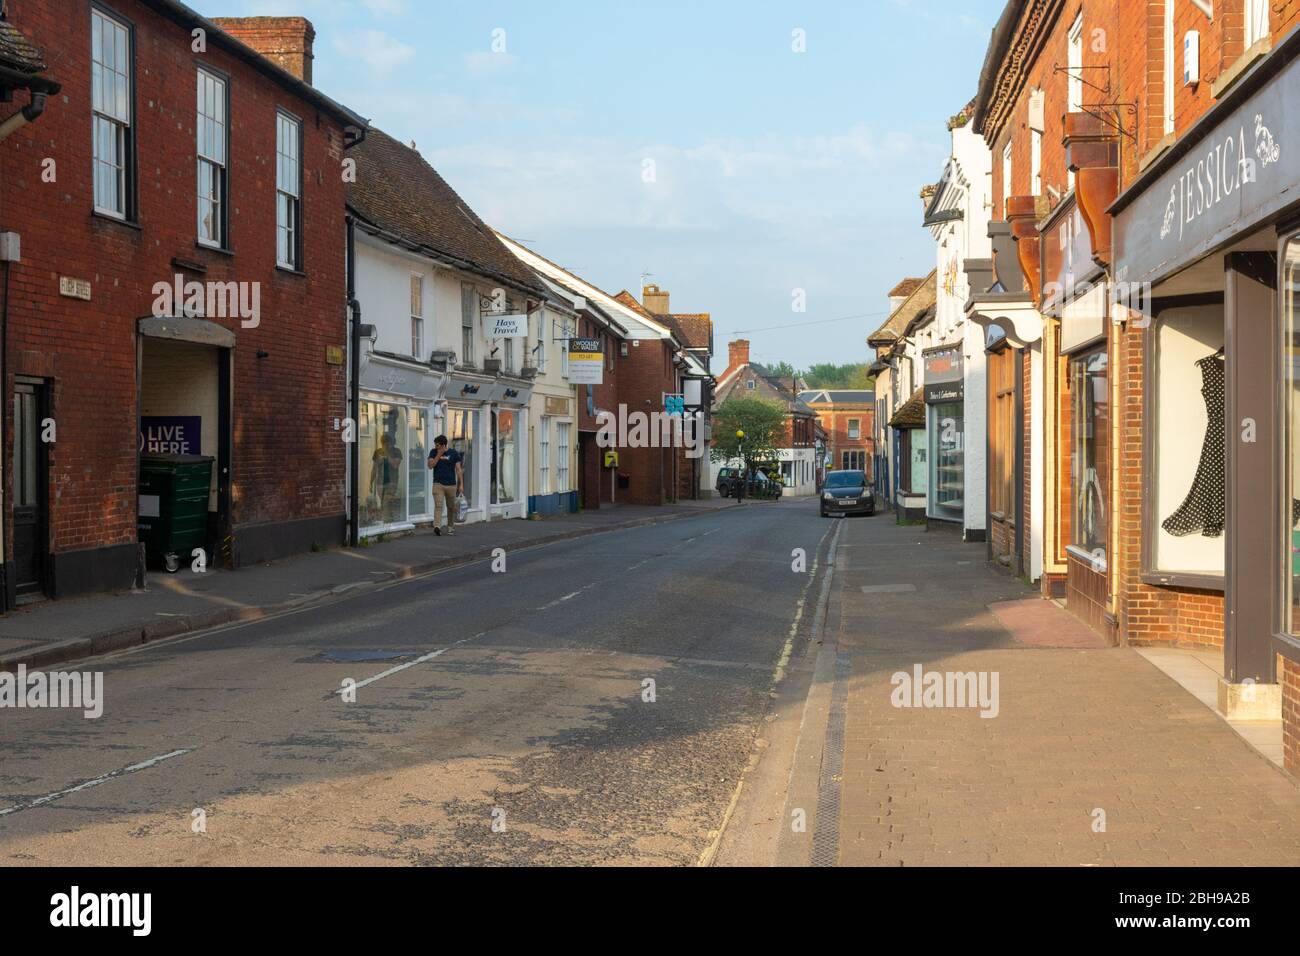 Nearly deserted High Street ot what would normally be a busy ime of day on a Friday evening, Coronavirus outbreak, 2020, UK Stock Photo